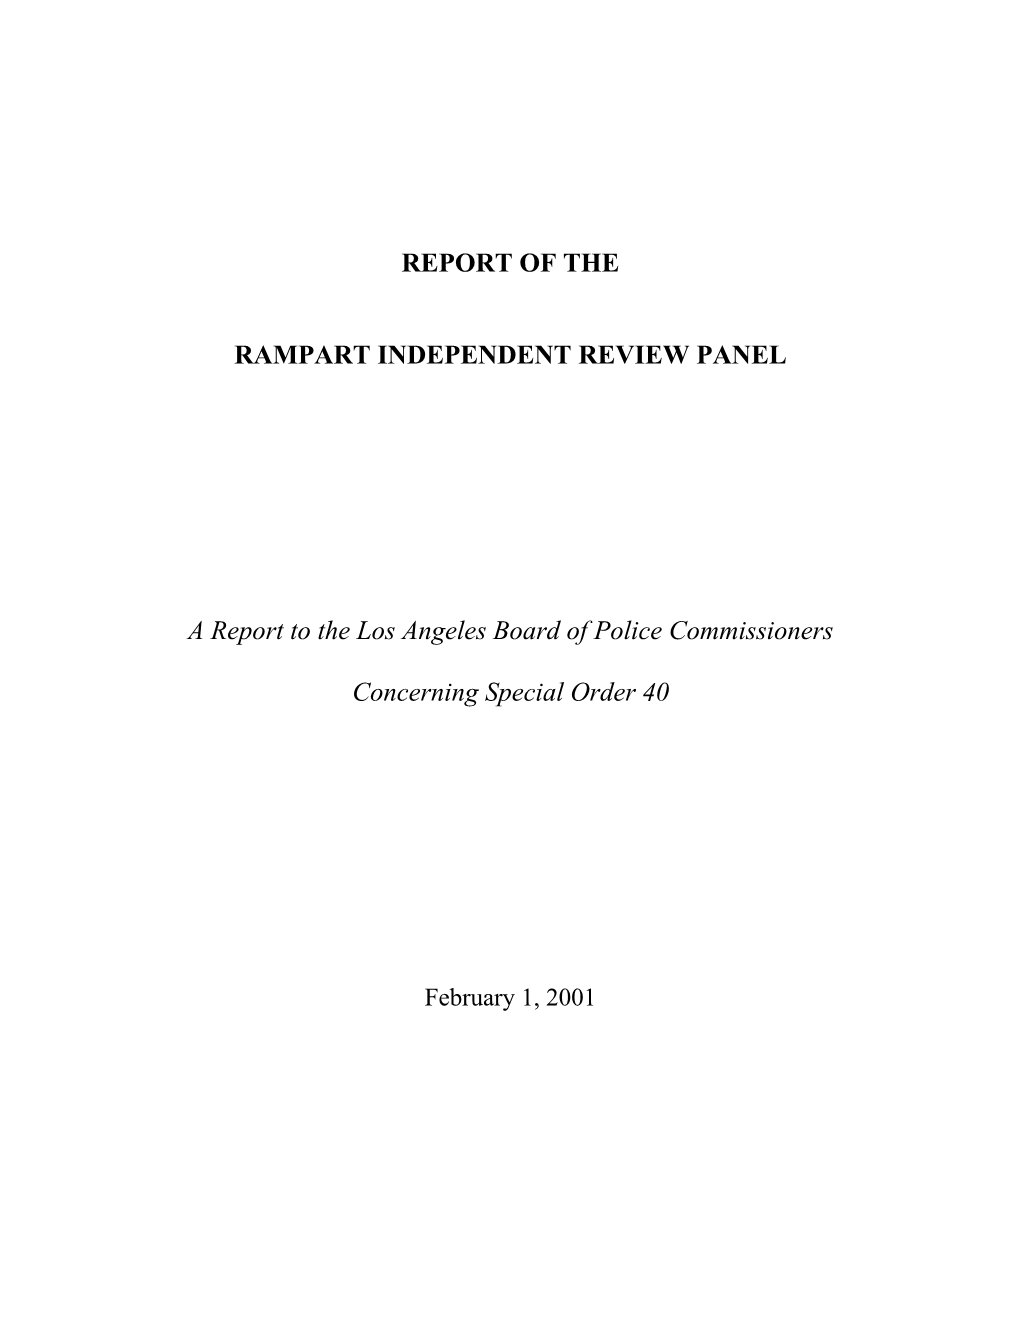 Report of the Rampart Independent Review Panel A